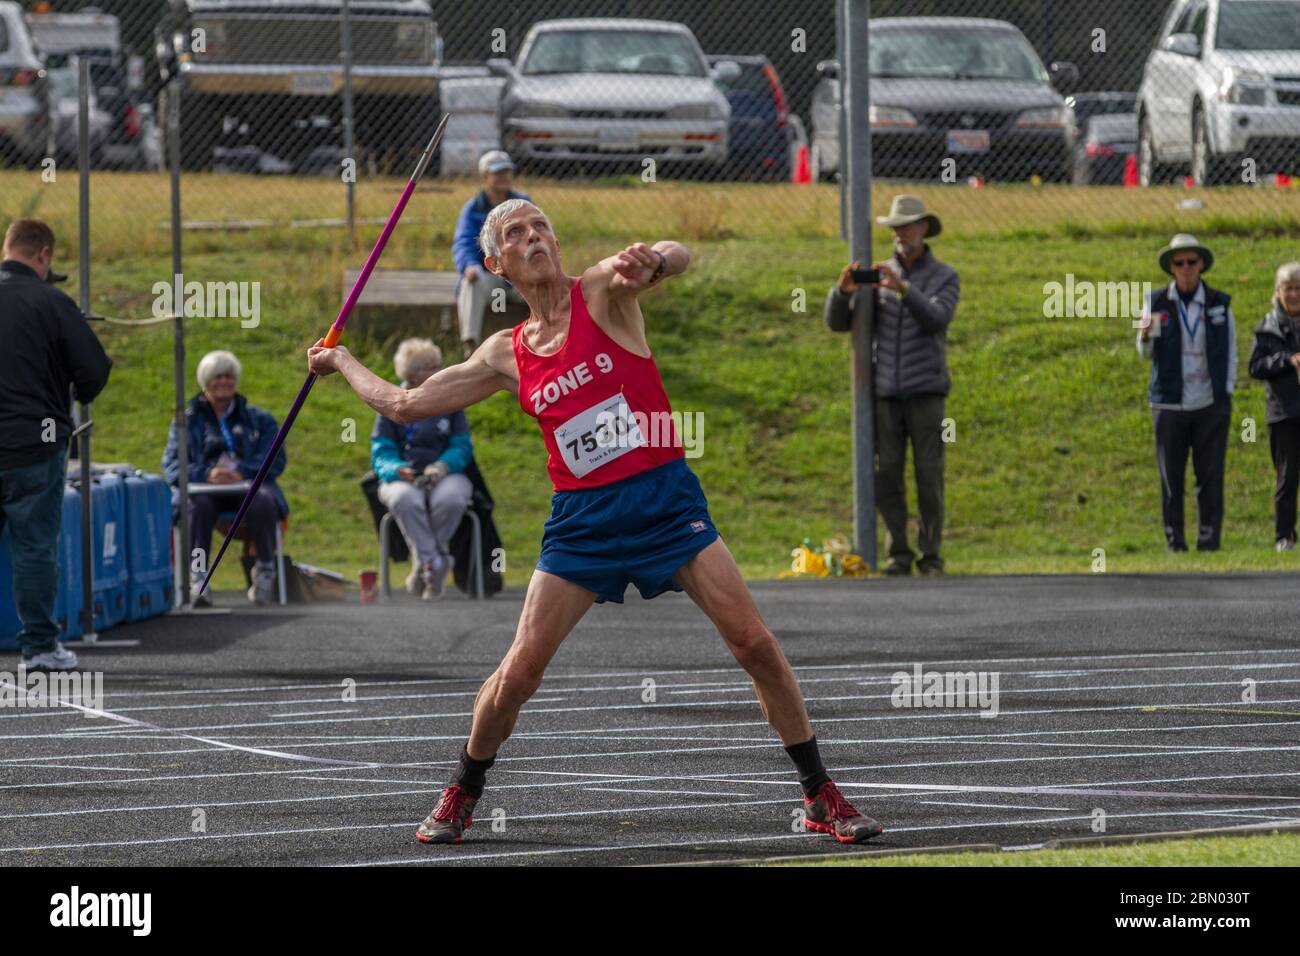 Competing in javelin throw, 75 year old male. Just before release. Stock Photo